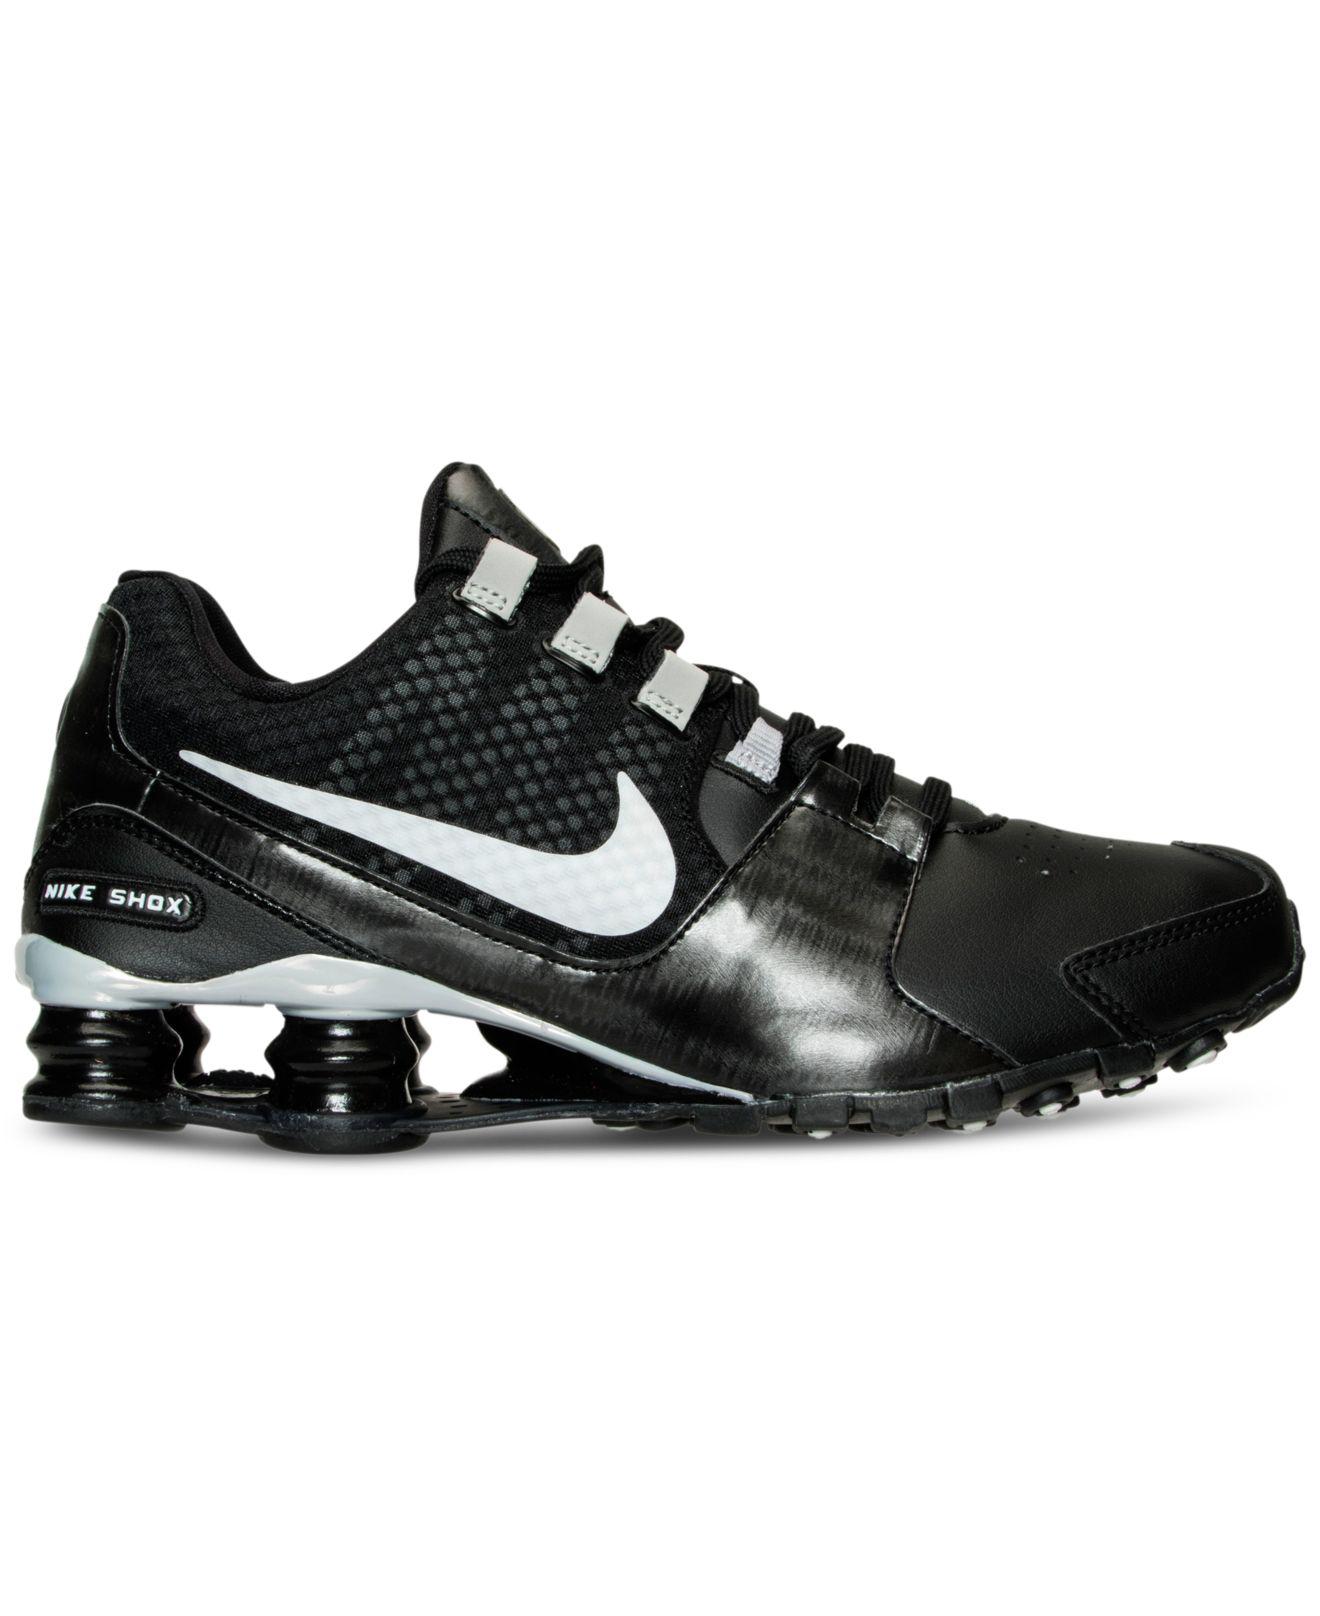 Nike Leather Shox Avenue Running Sneakers From Finish Line in Black - Lyst